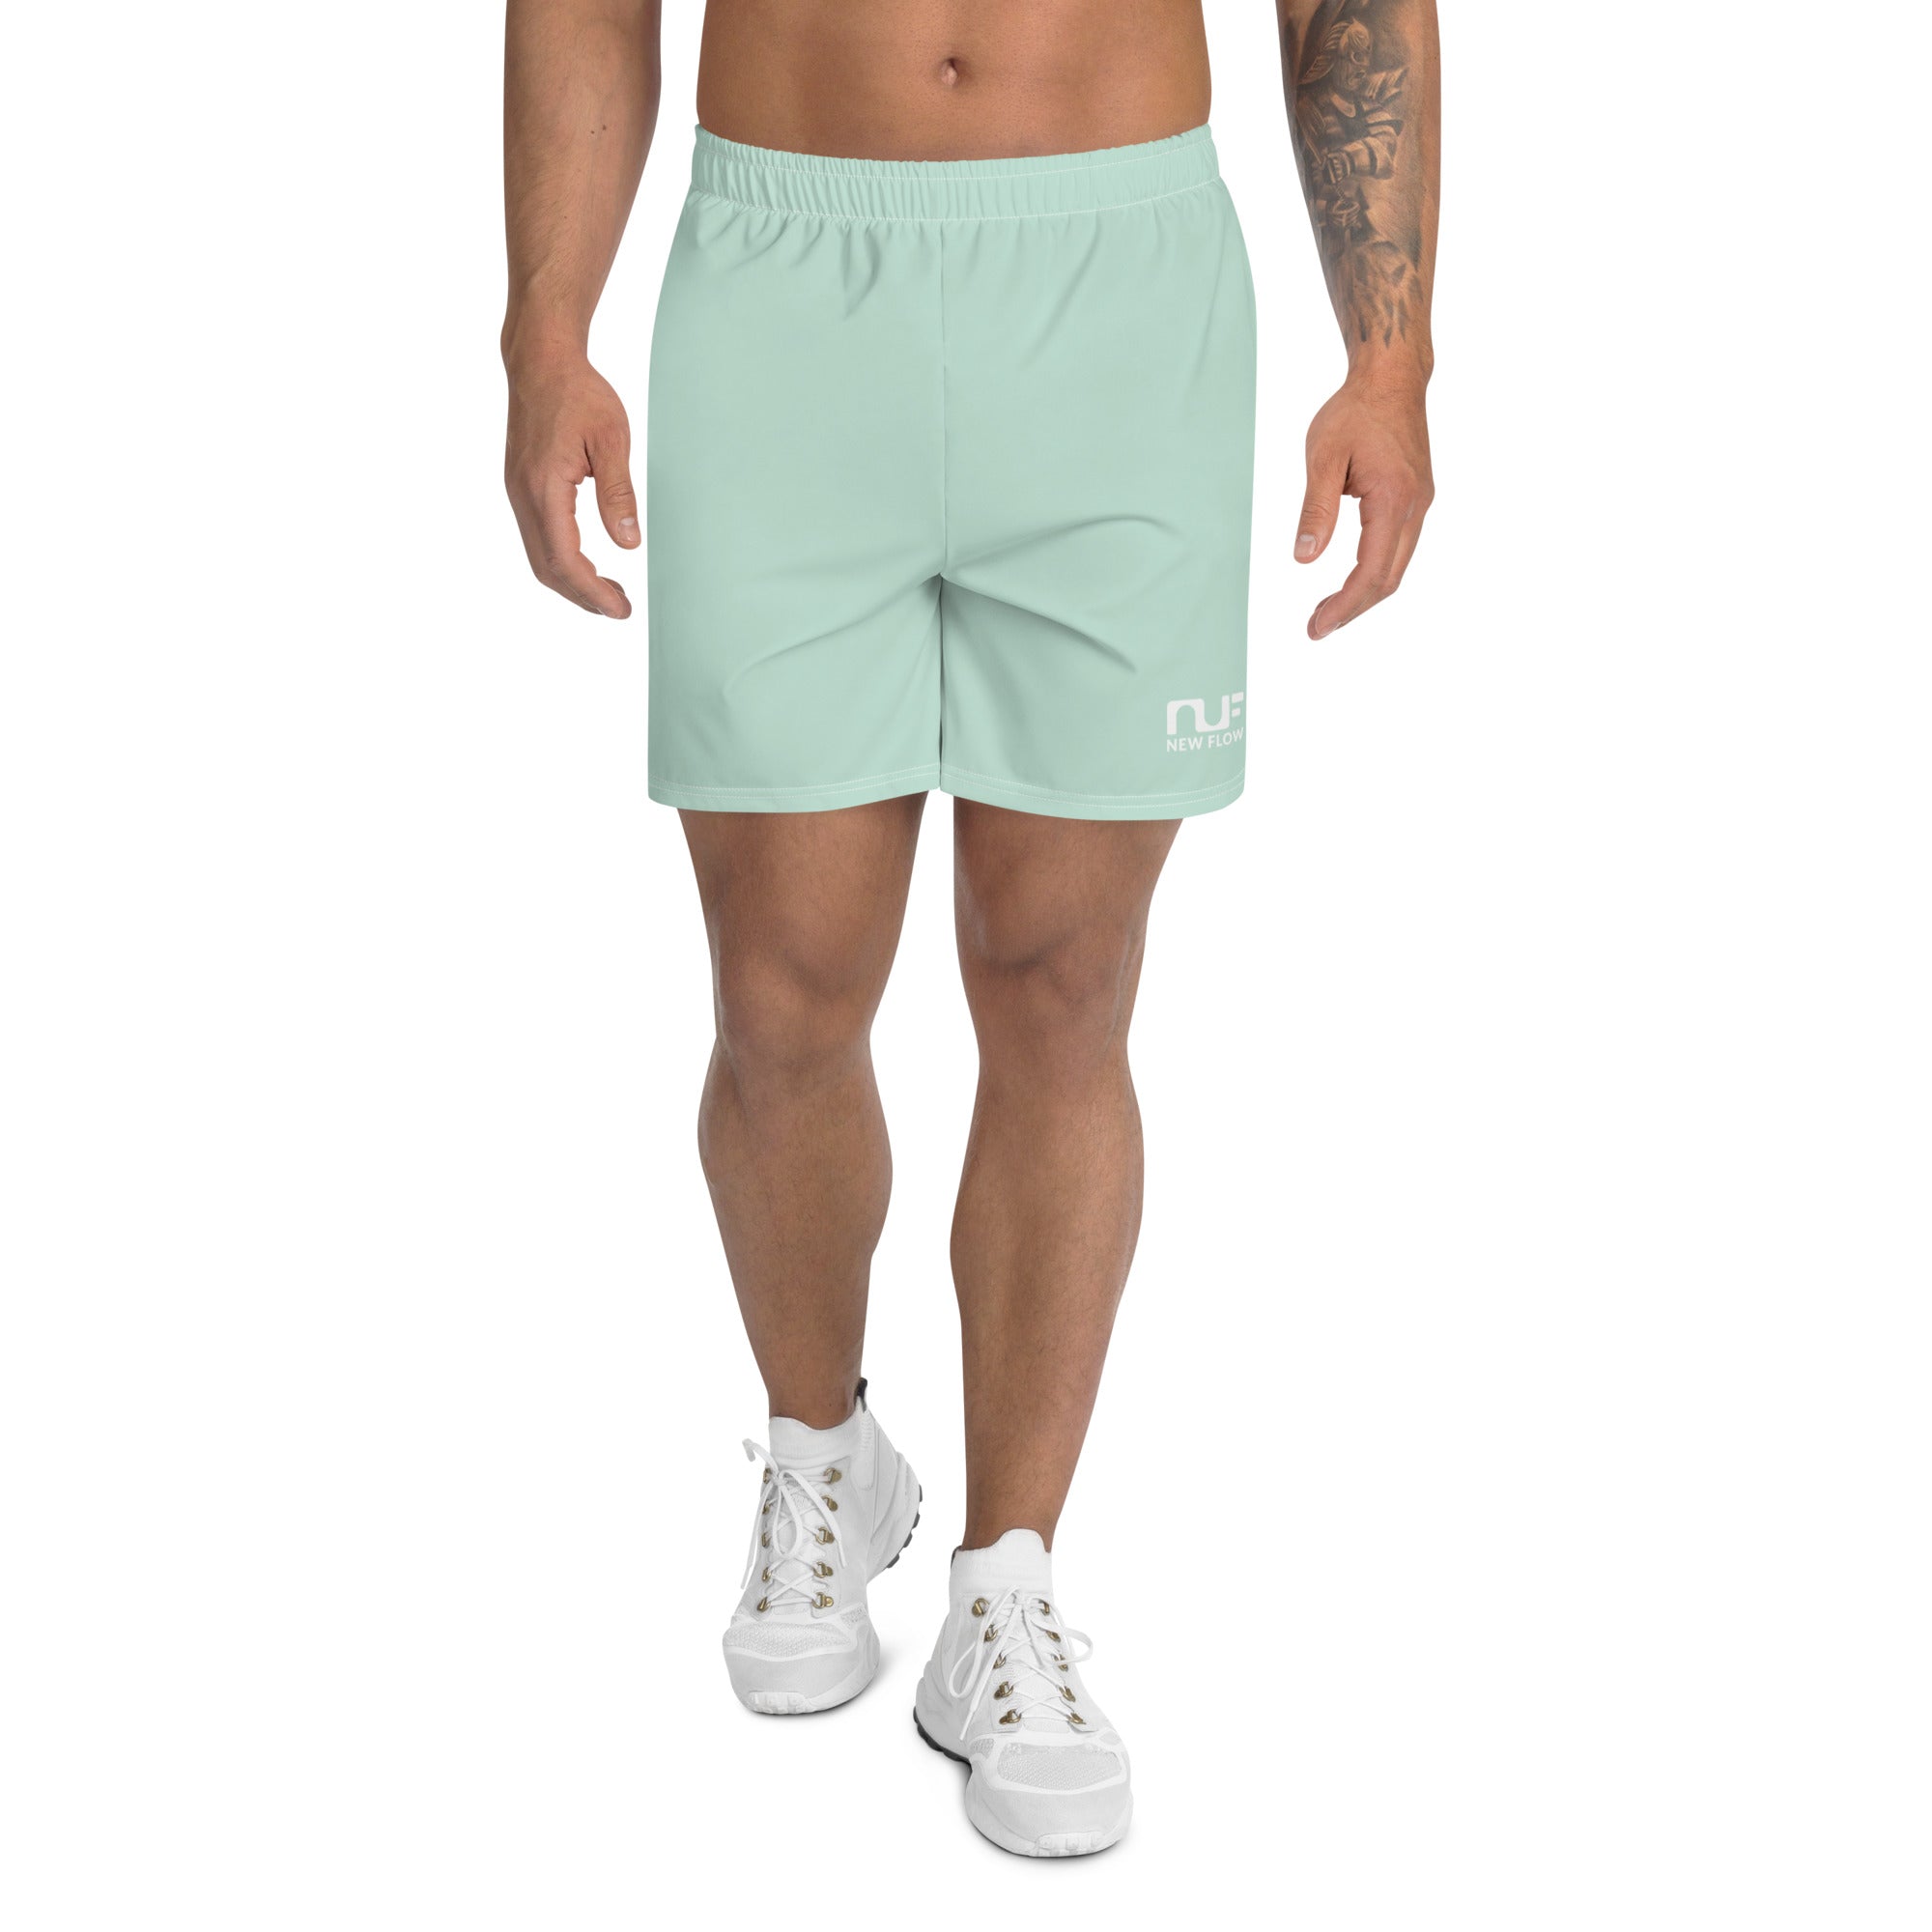 MEN'S RECYCLED ATHLETIC SHORTS – SEA FOAM